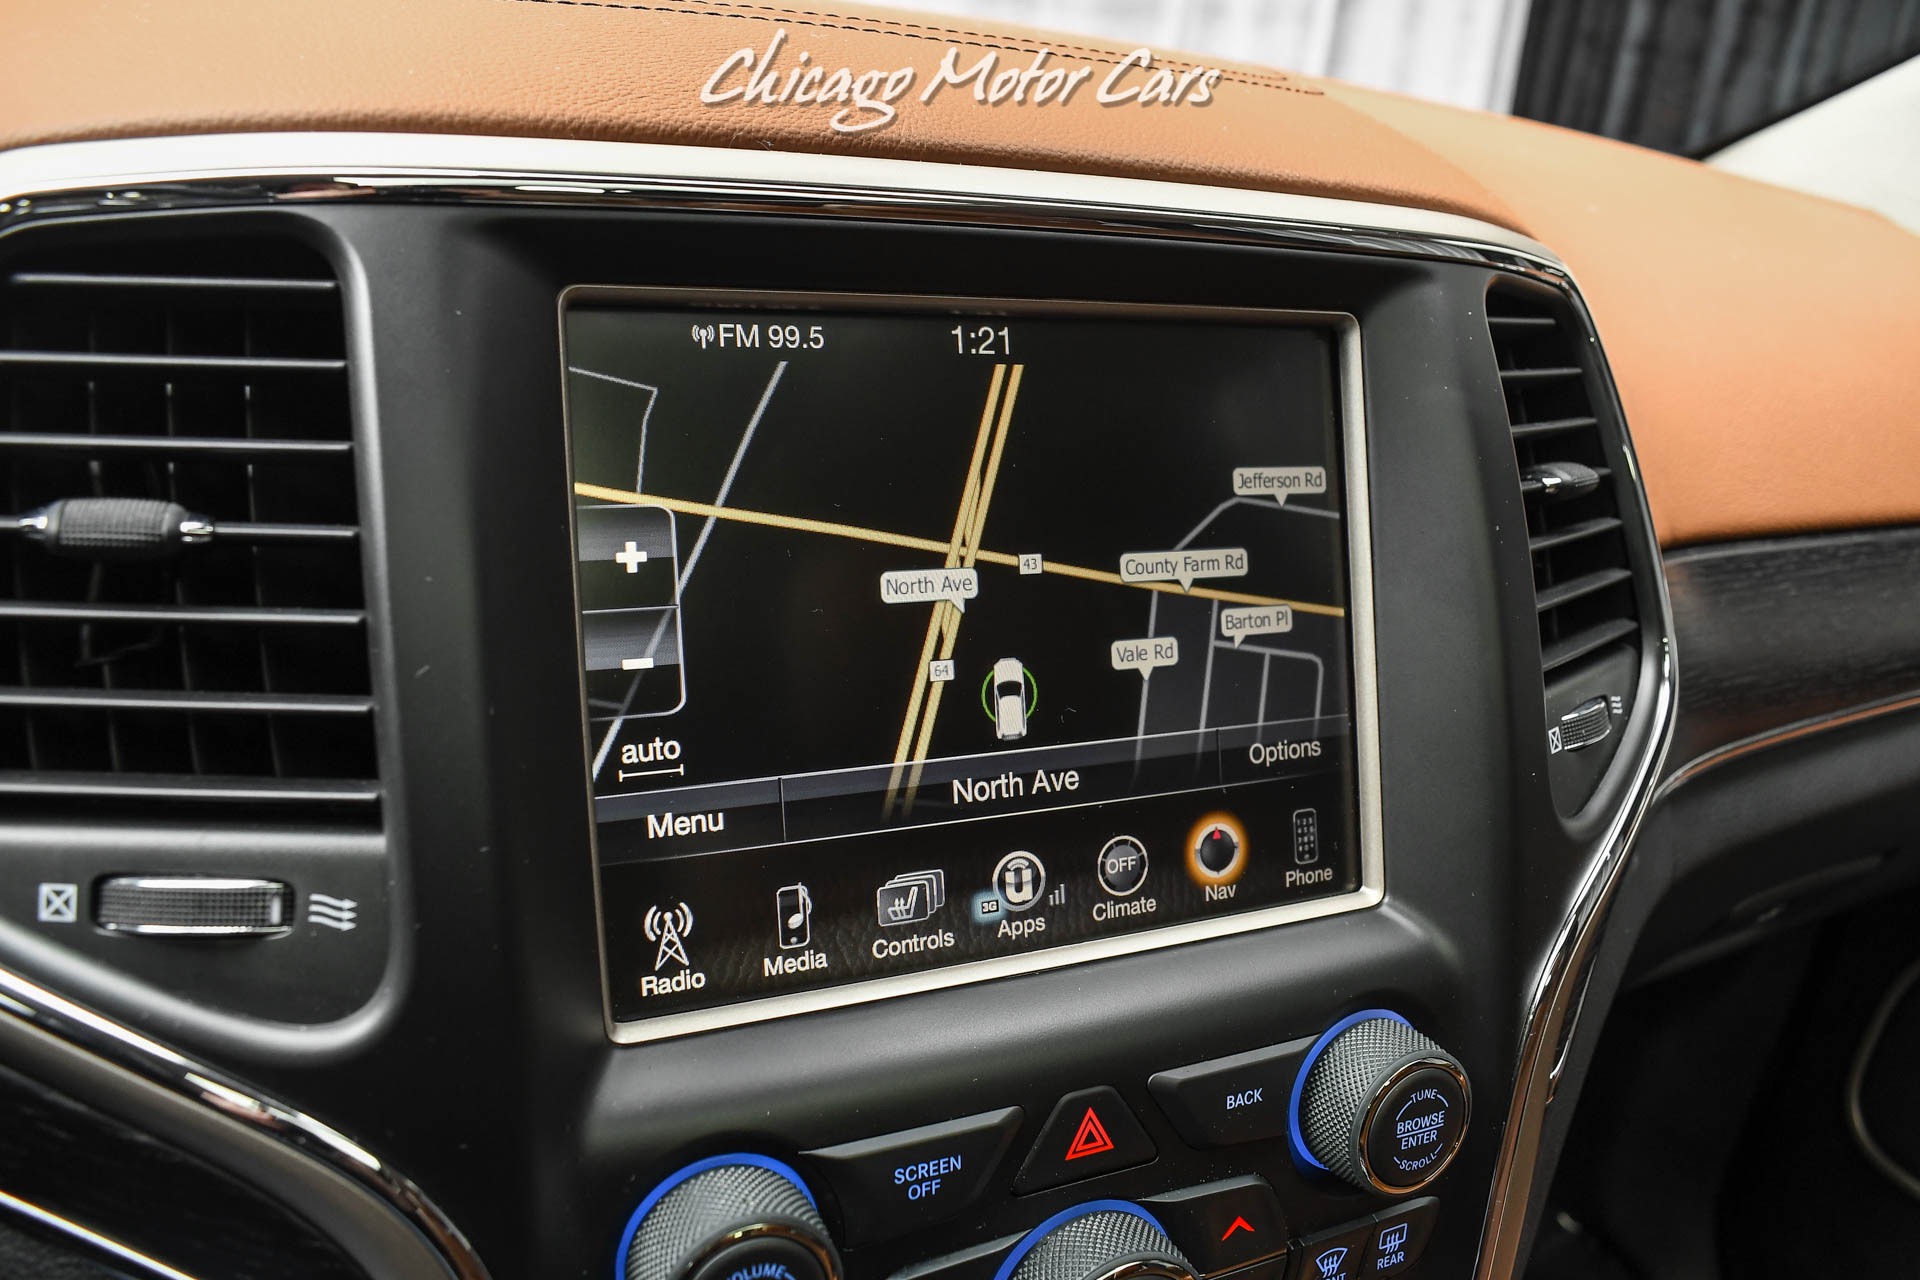 Used-2015-Jeep-Grand-Cherokee-Summit-California-Edition-54kMSRP-Navigation-Leather